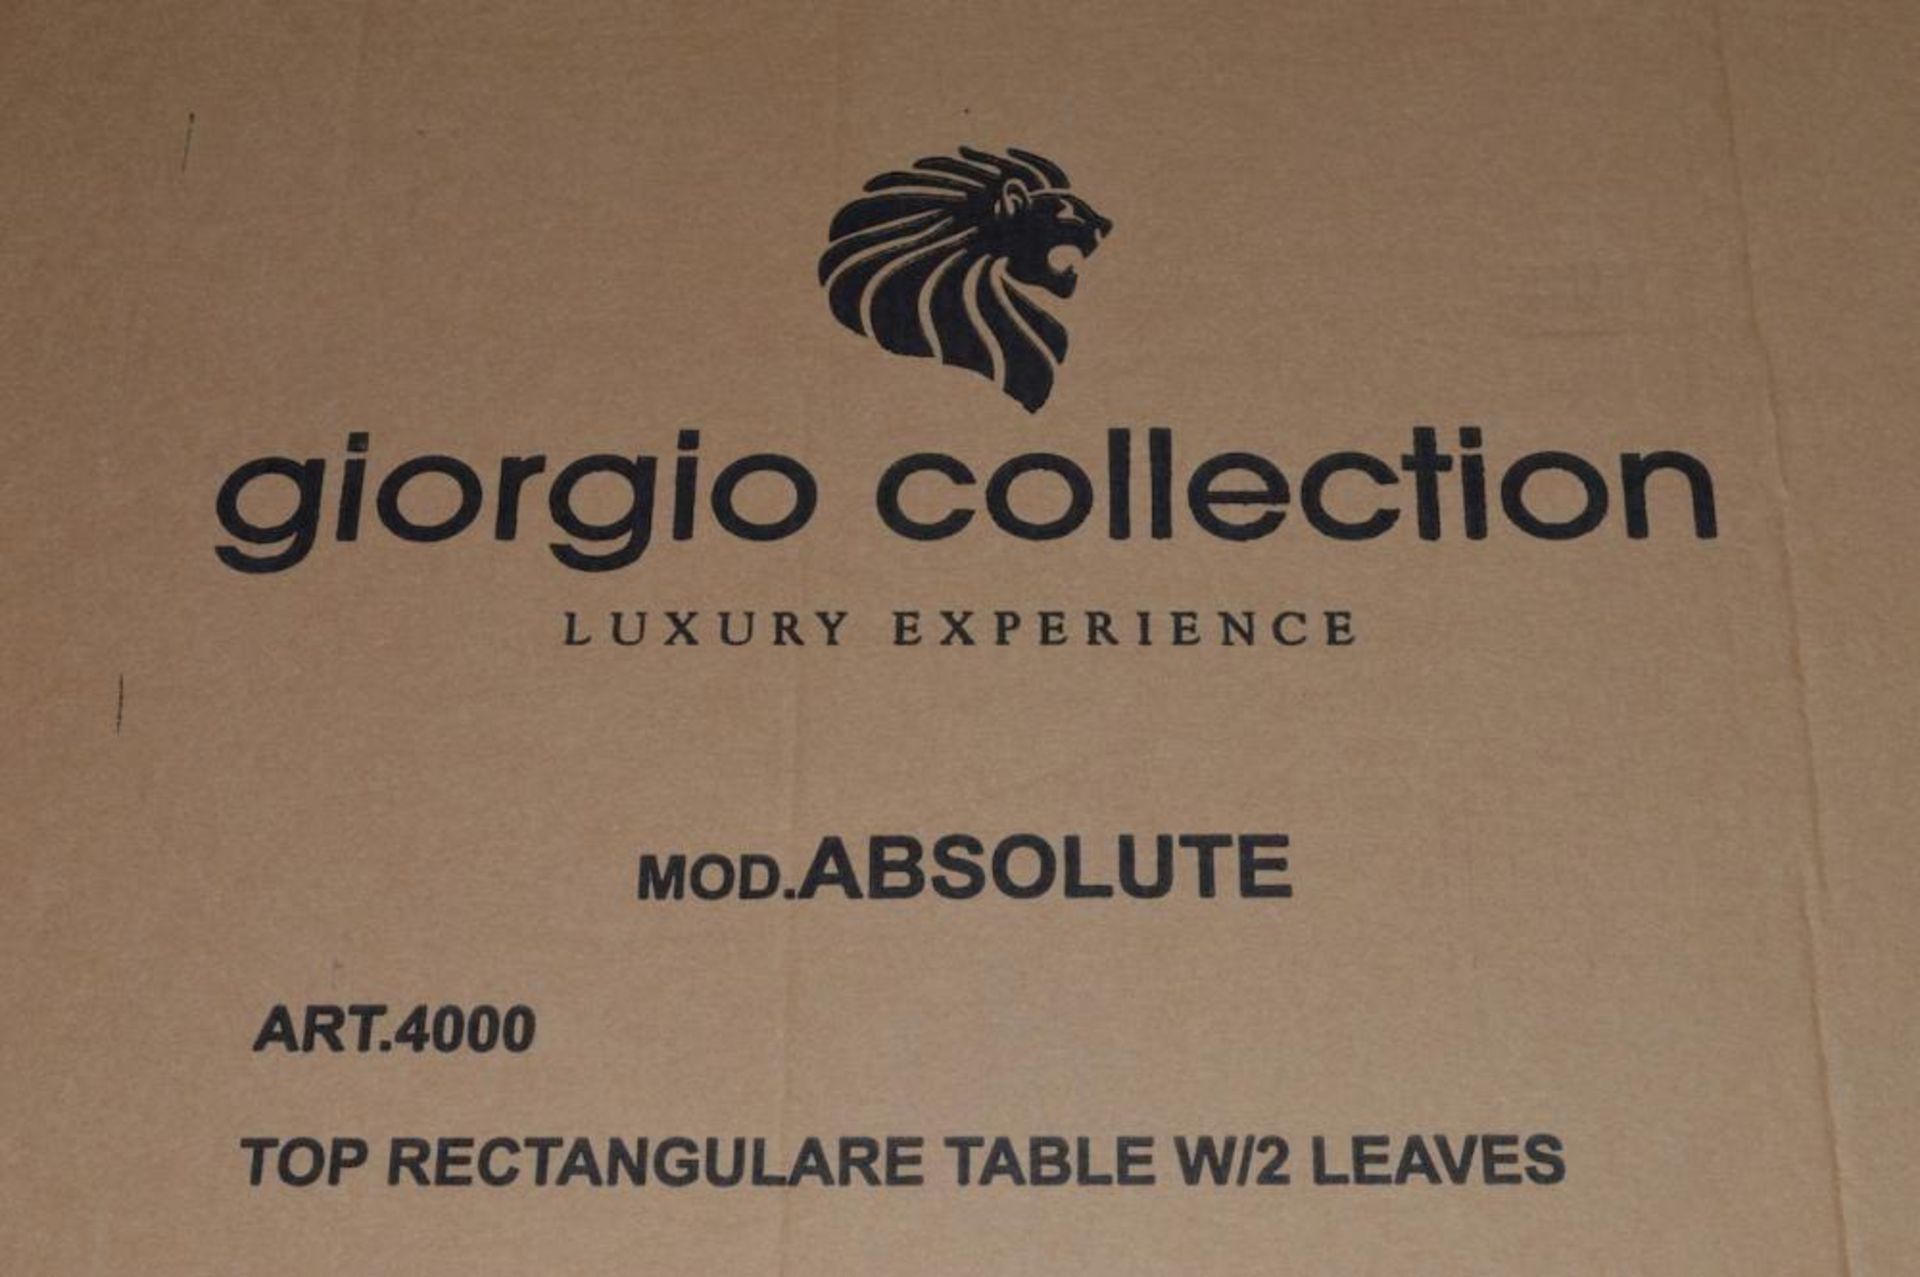 1 x Giorgio Absolute Dining Extension Table 4000 – Mako Japanese Tamos Burl Veneer With a High Gloss - Image 8 of 24